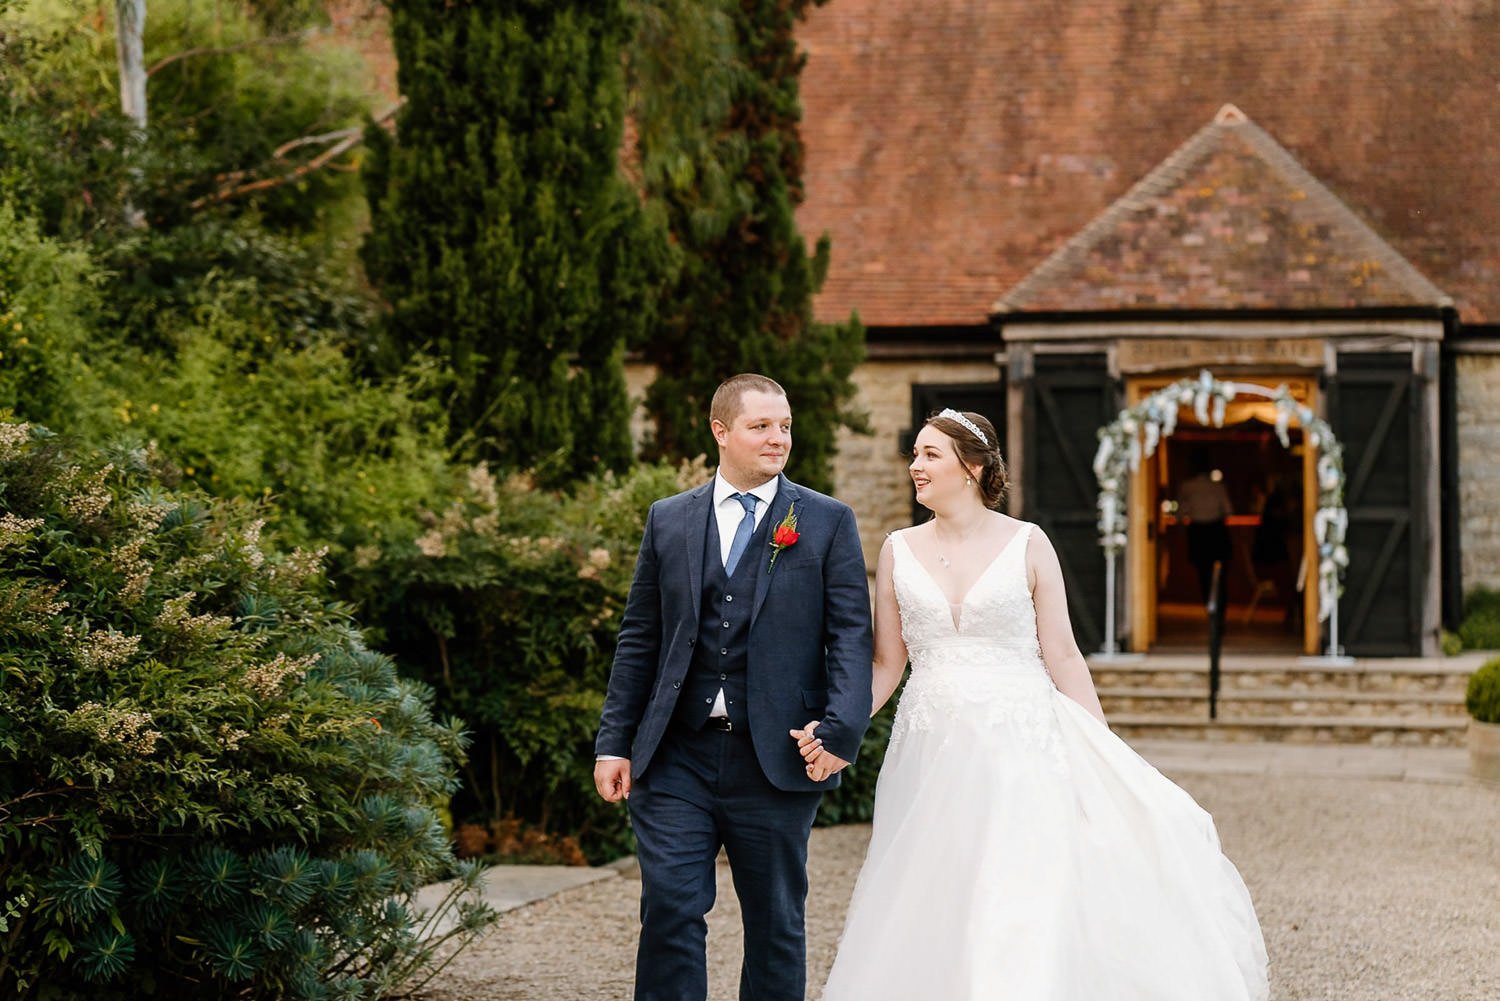 wedding photographer oxfordshire and the cotswolds107.jpg